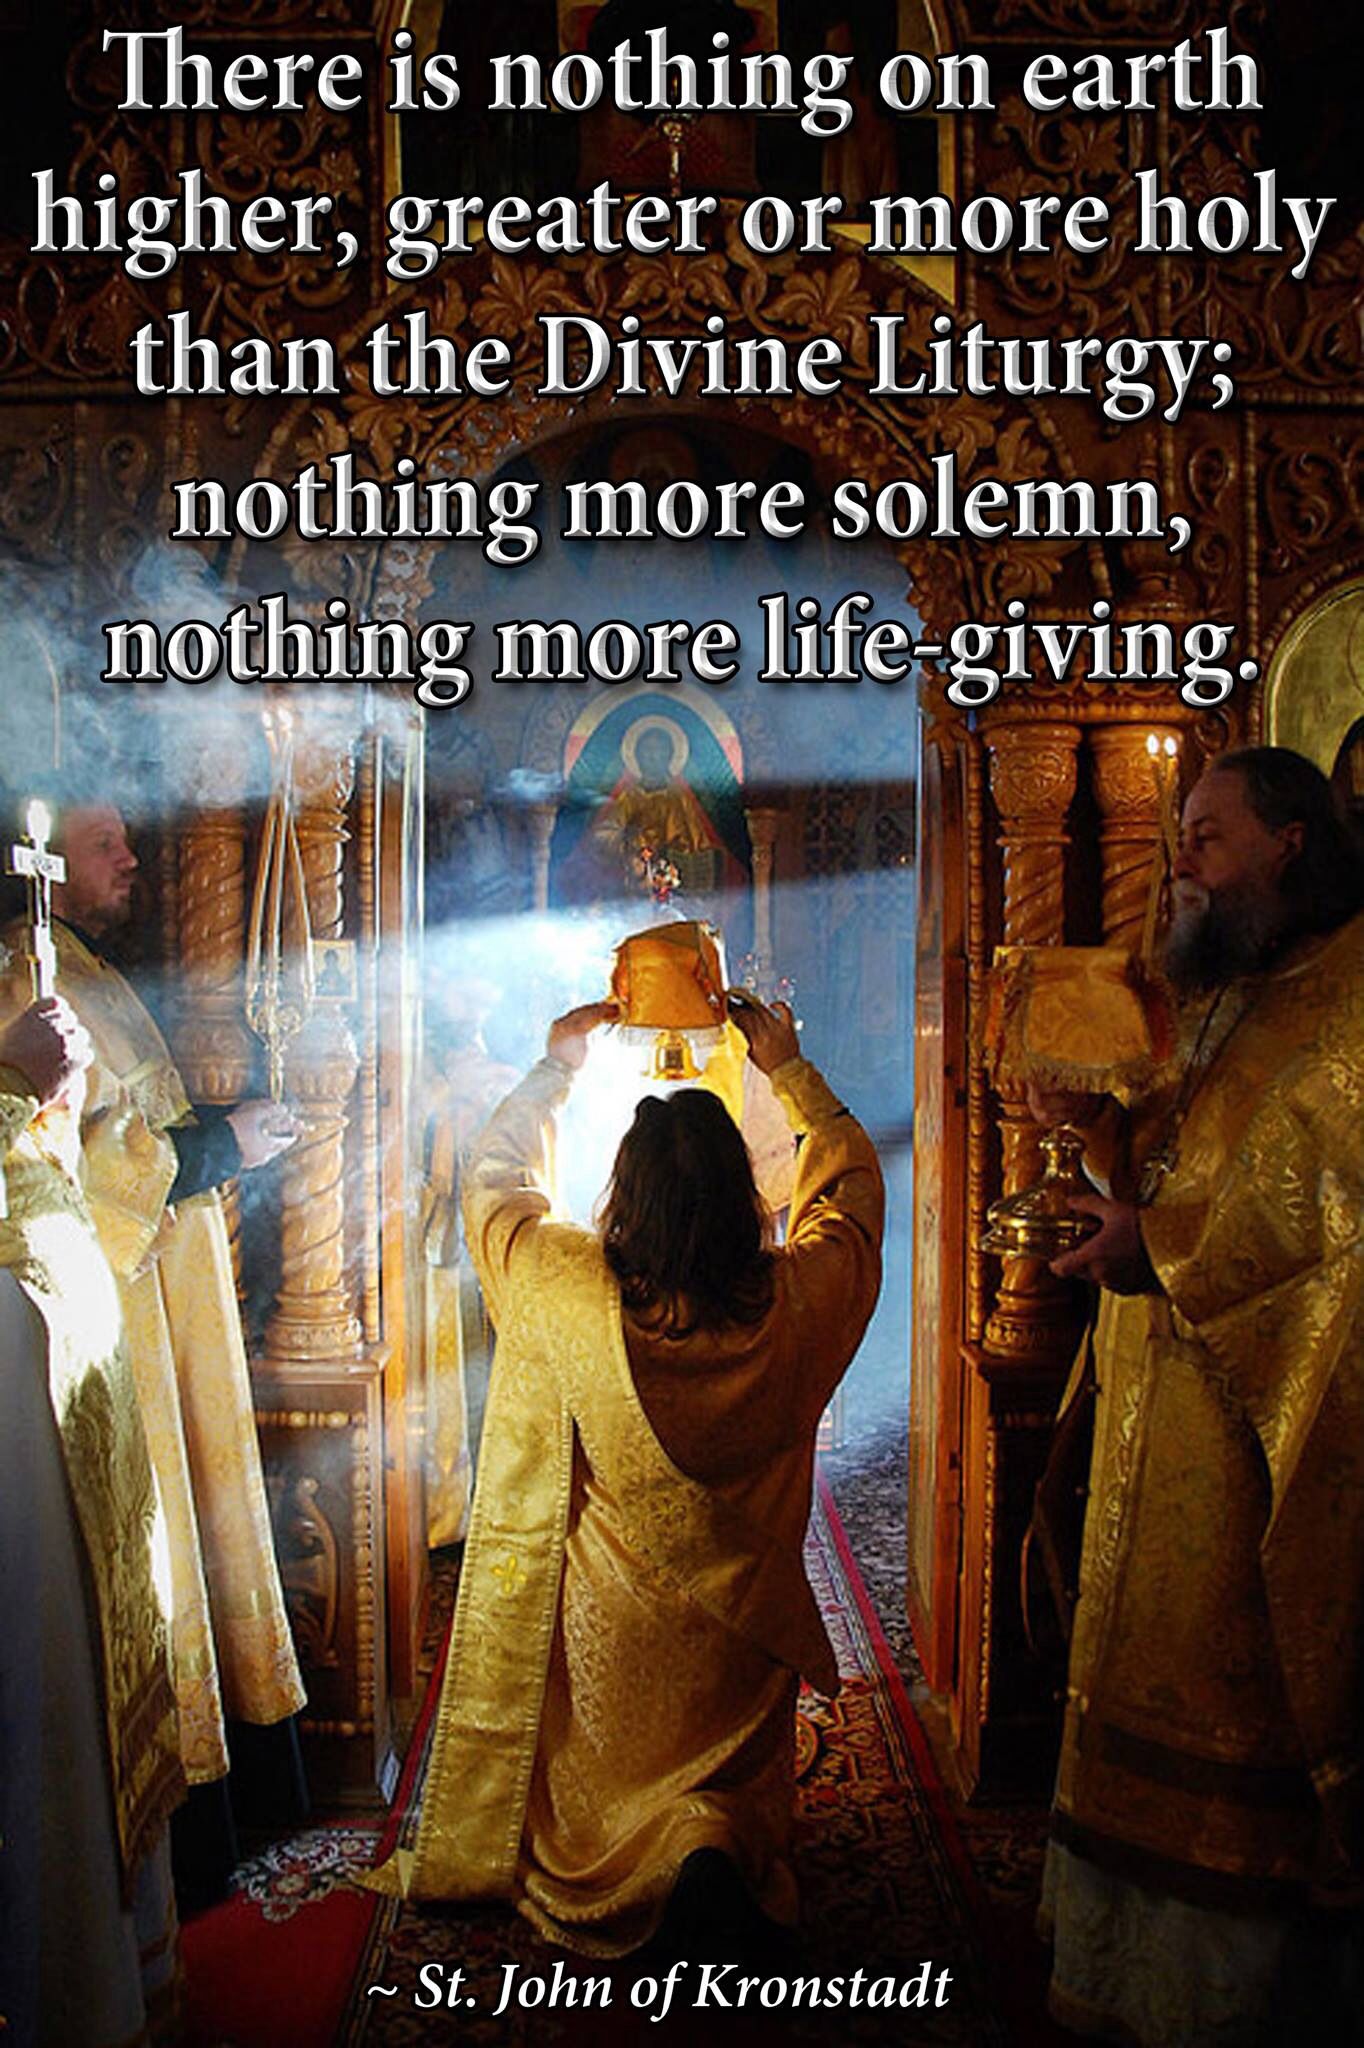 There is nothing on earth higher, greater or more holy than the Divine Liturgy,…